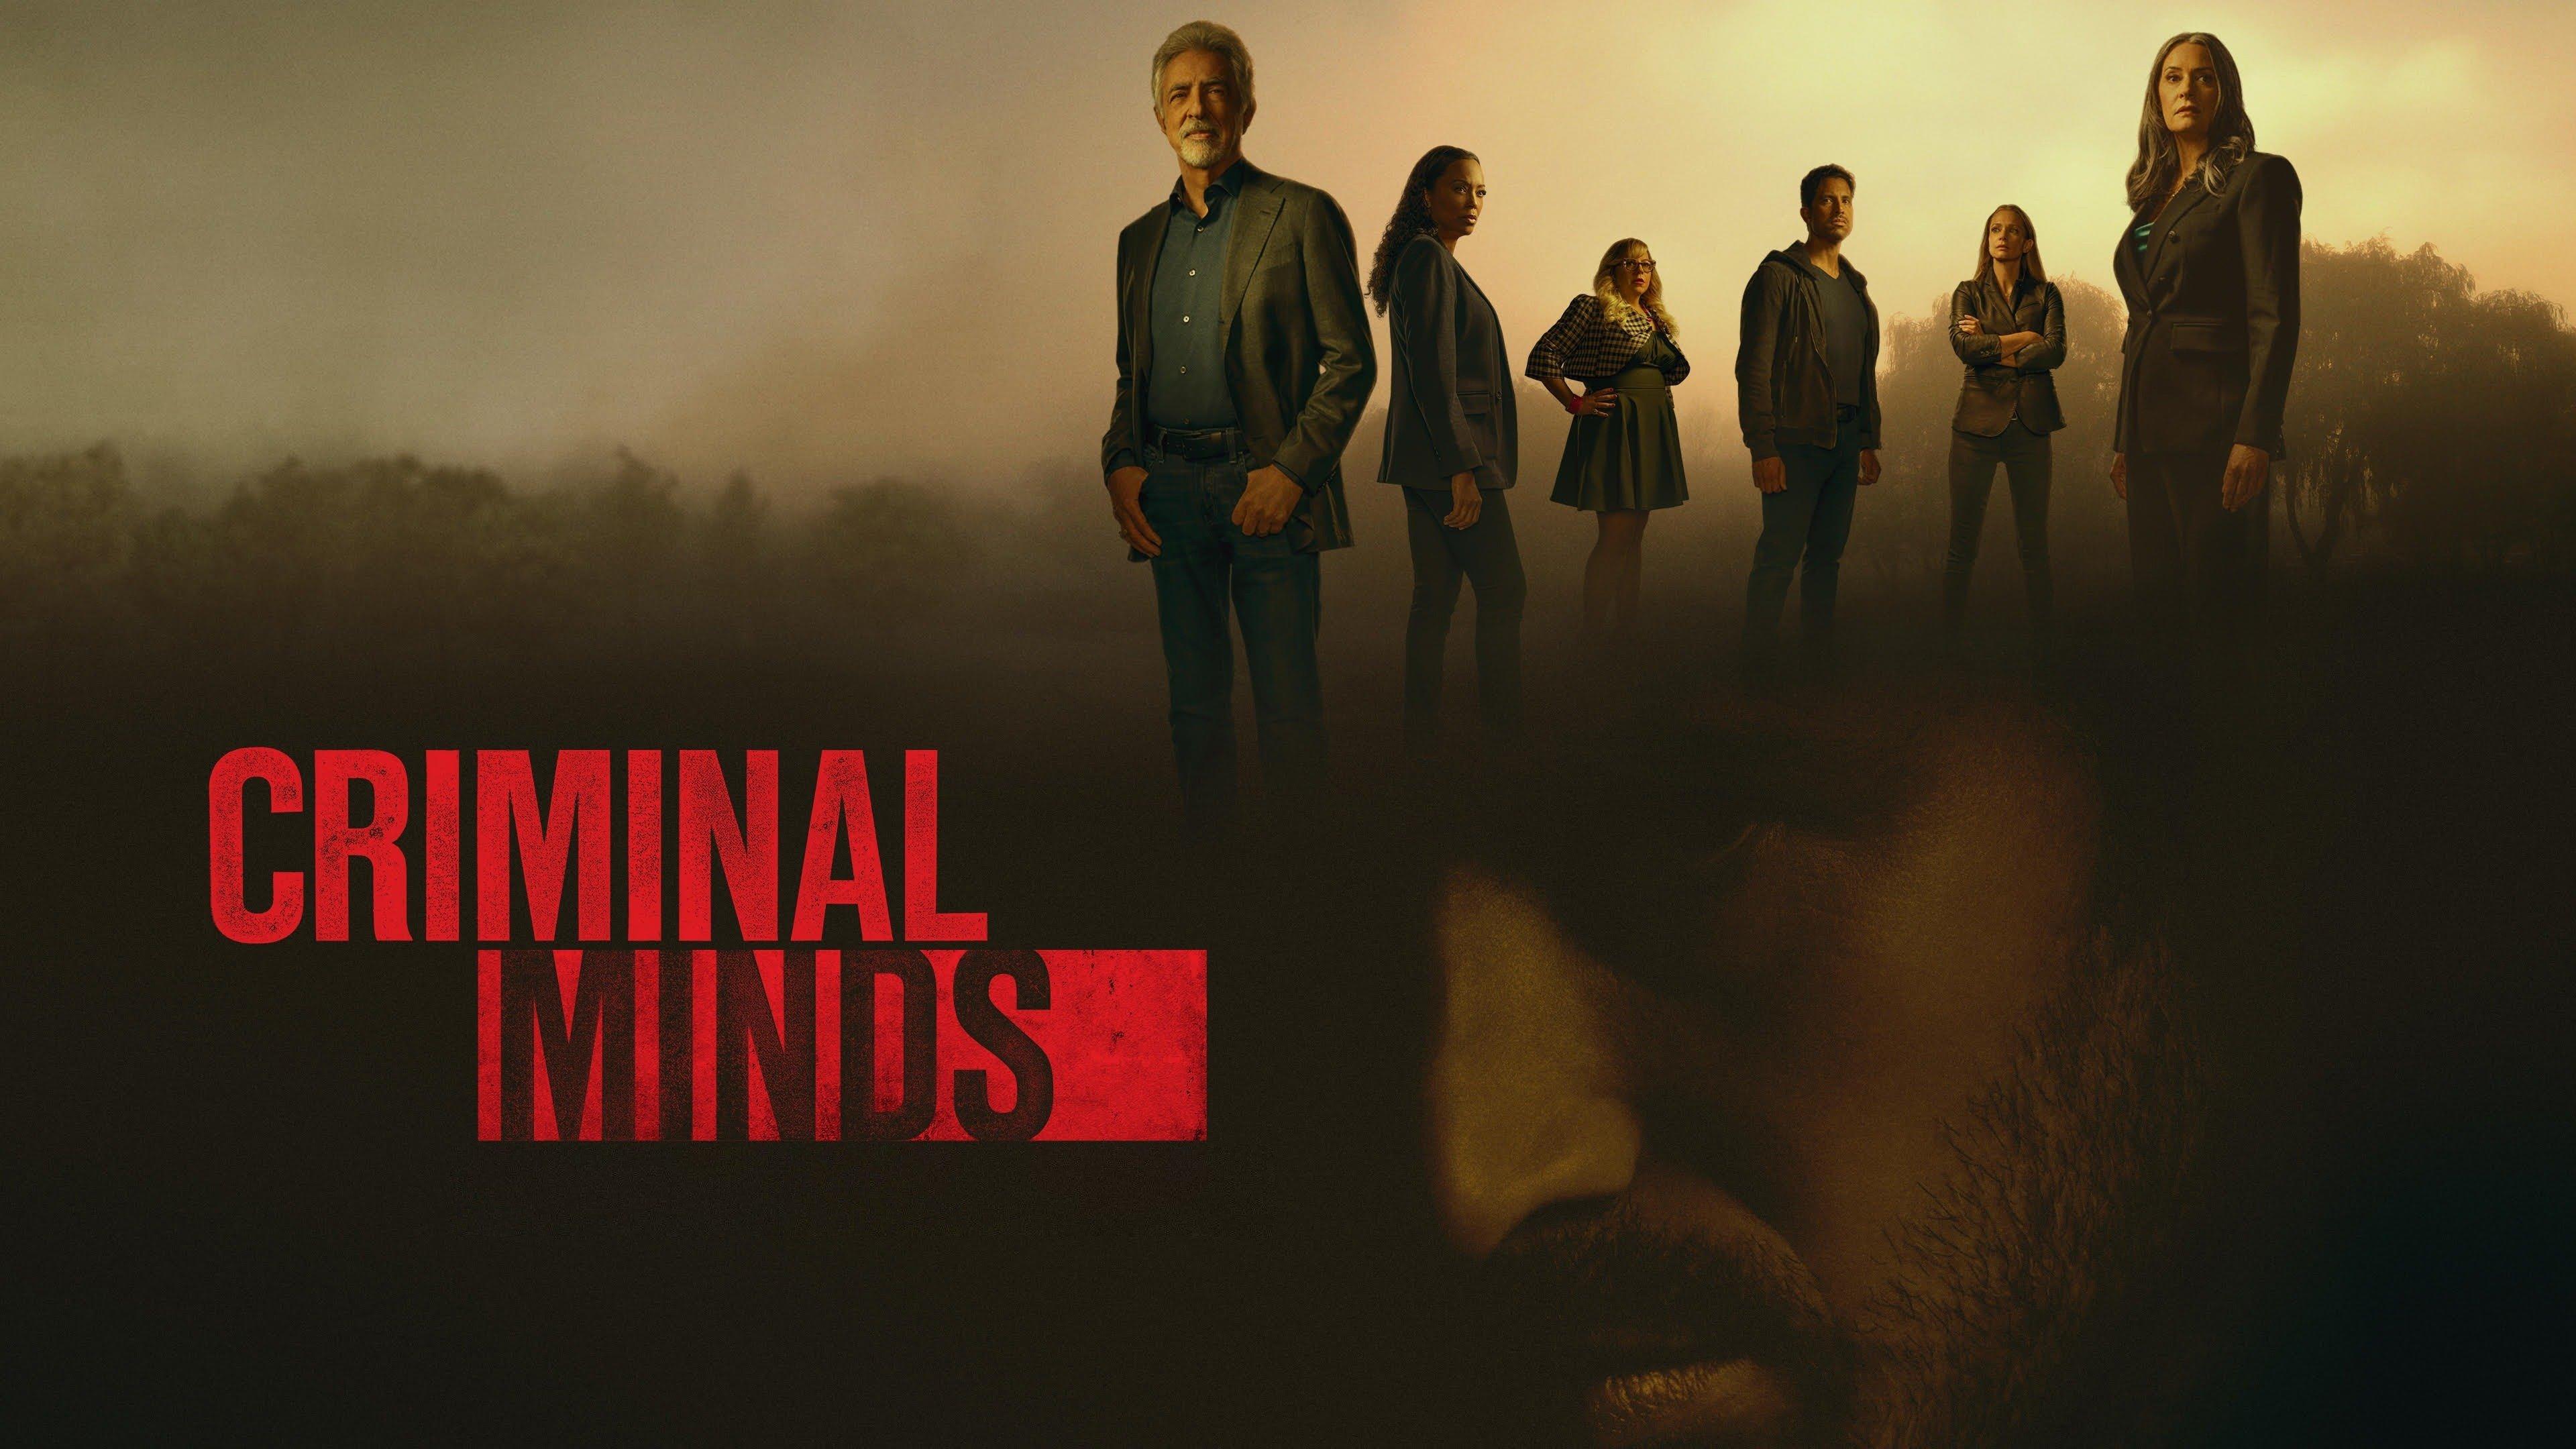 Watch Criminal Minds Streaming Online on Philo (Free Trial)